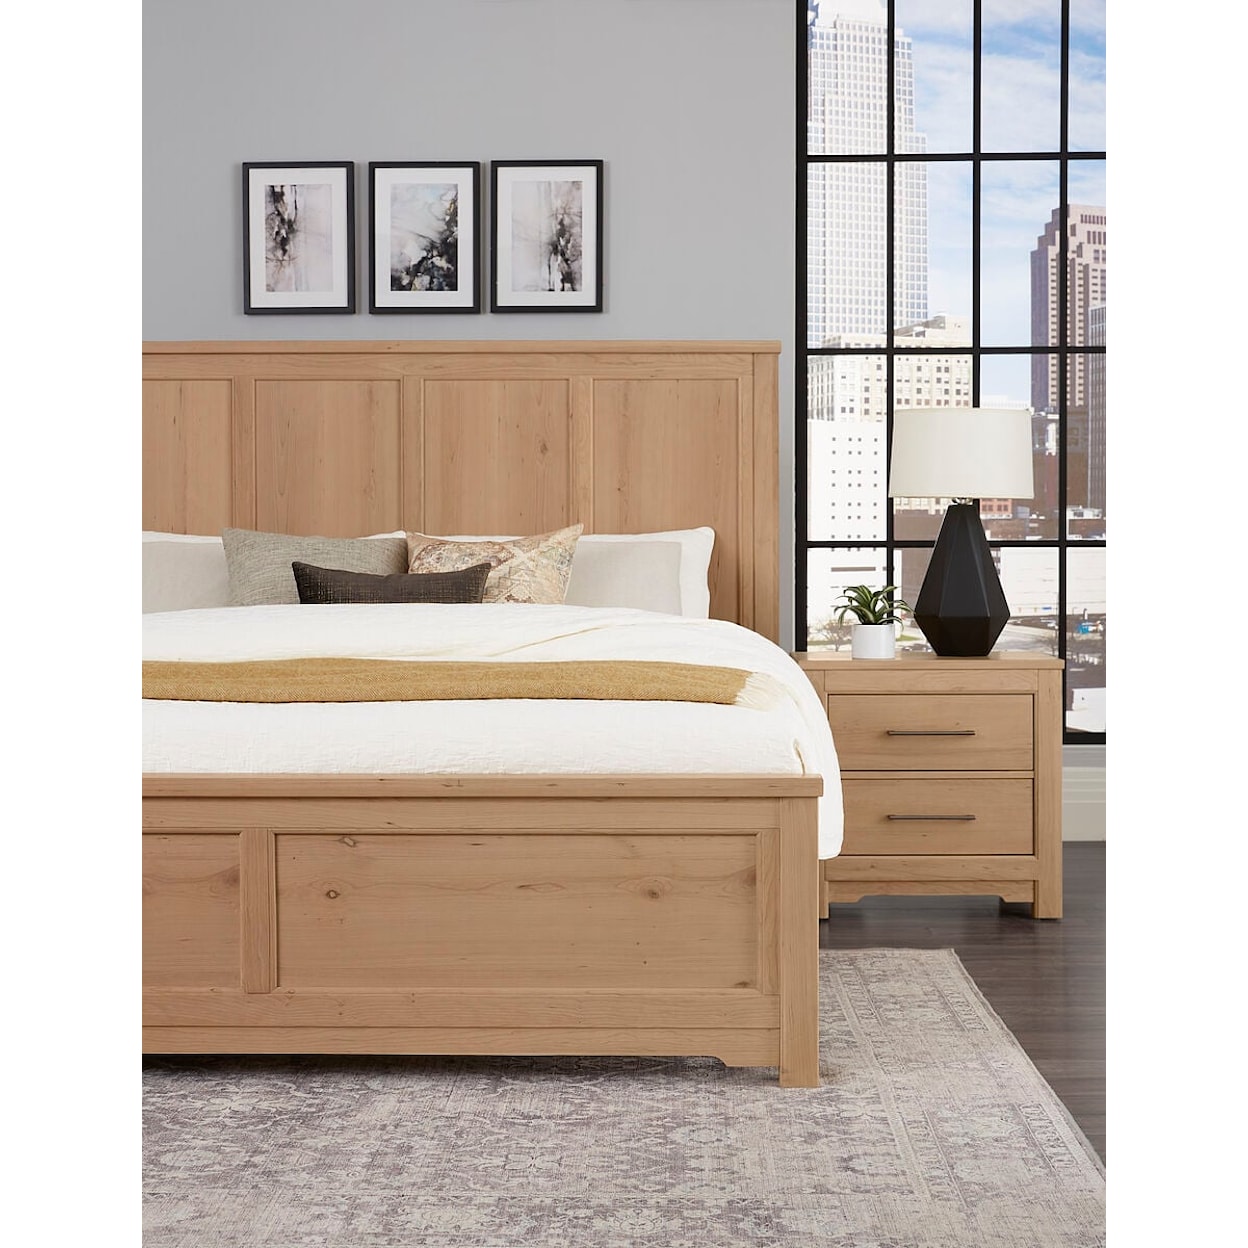 Artisan & Post Crafted Cherry California King Six Panel Bed